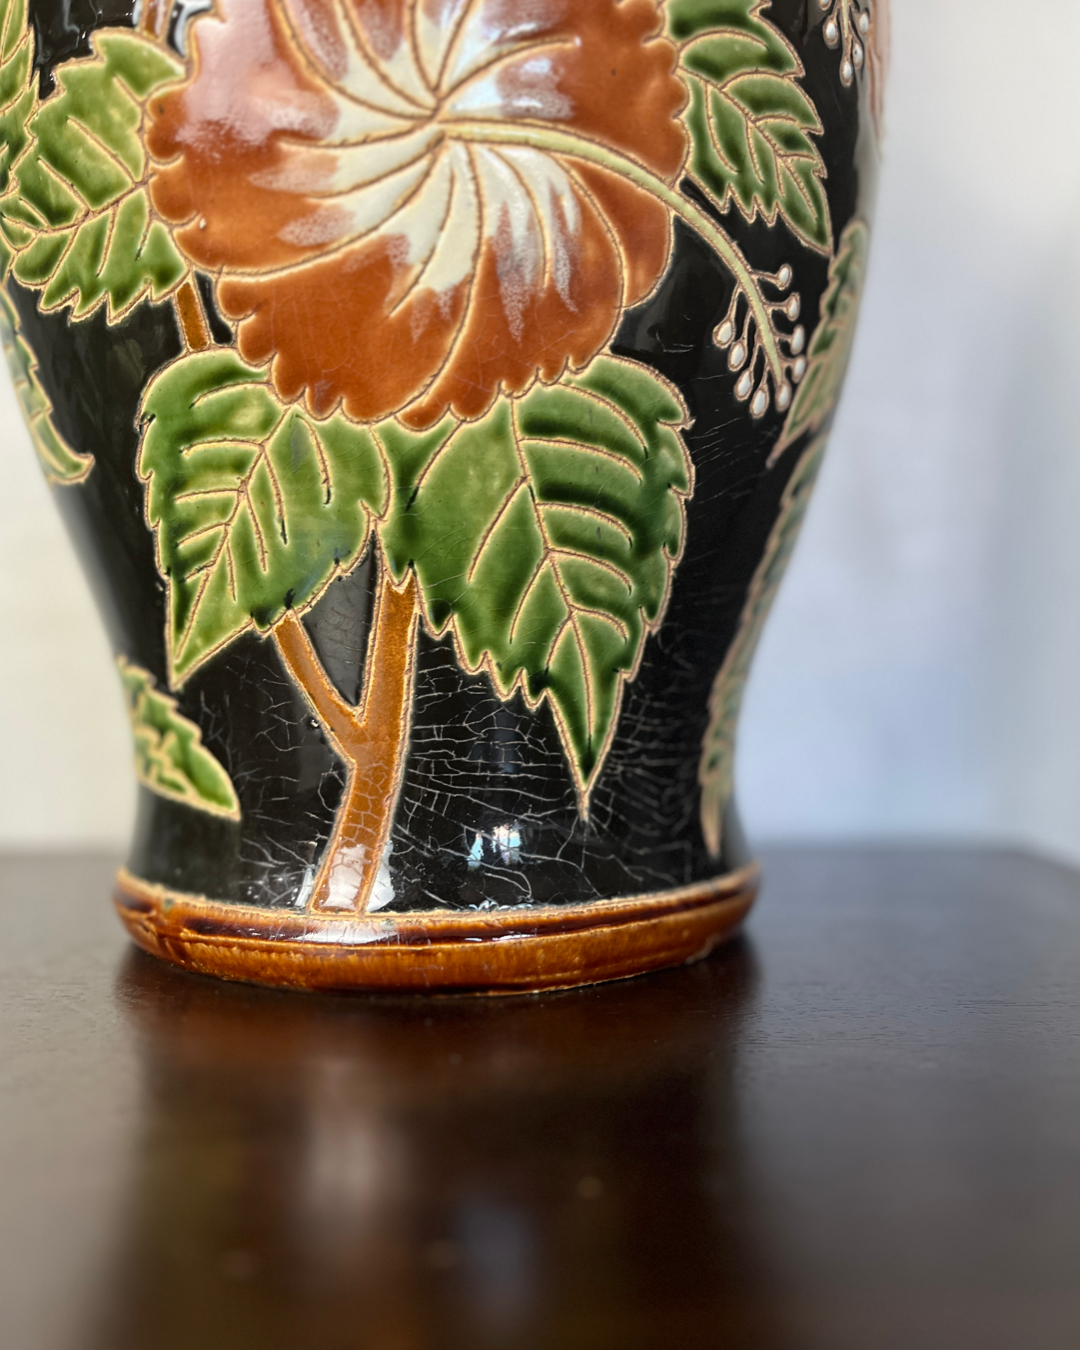 Vintage Majolica Vase: Intricate Hand-Painted Florals on Dramatic Black Glaze with Refined Brown Lining and Authentic Crazing